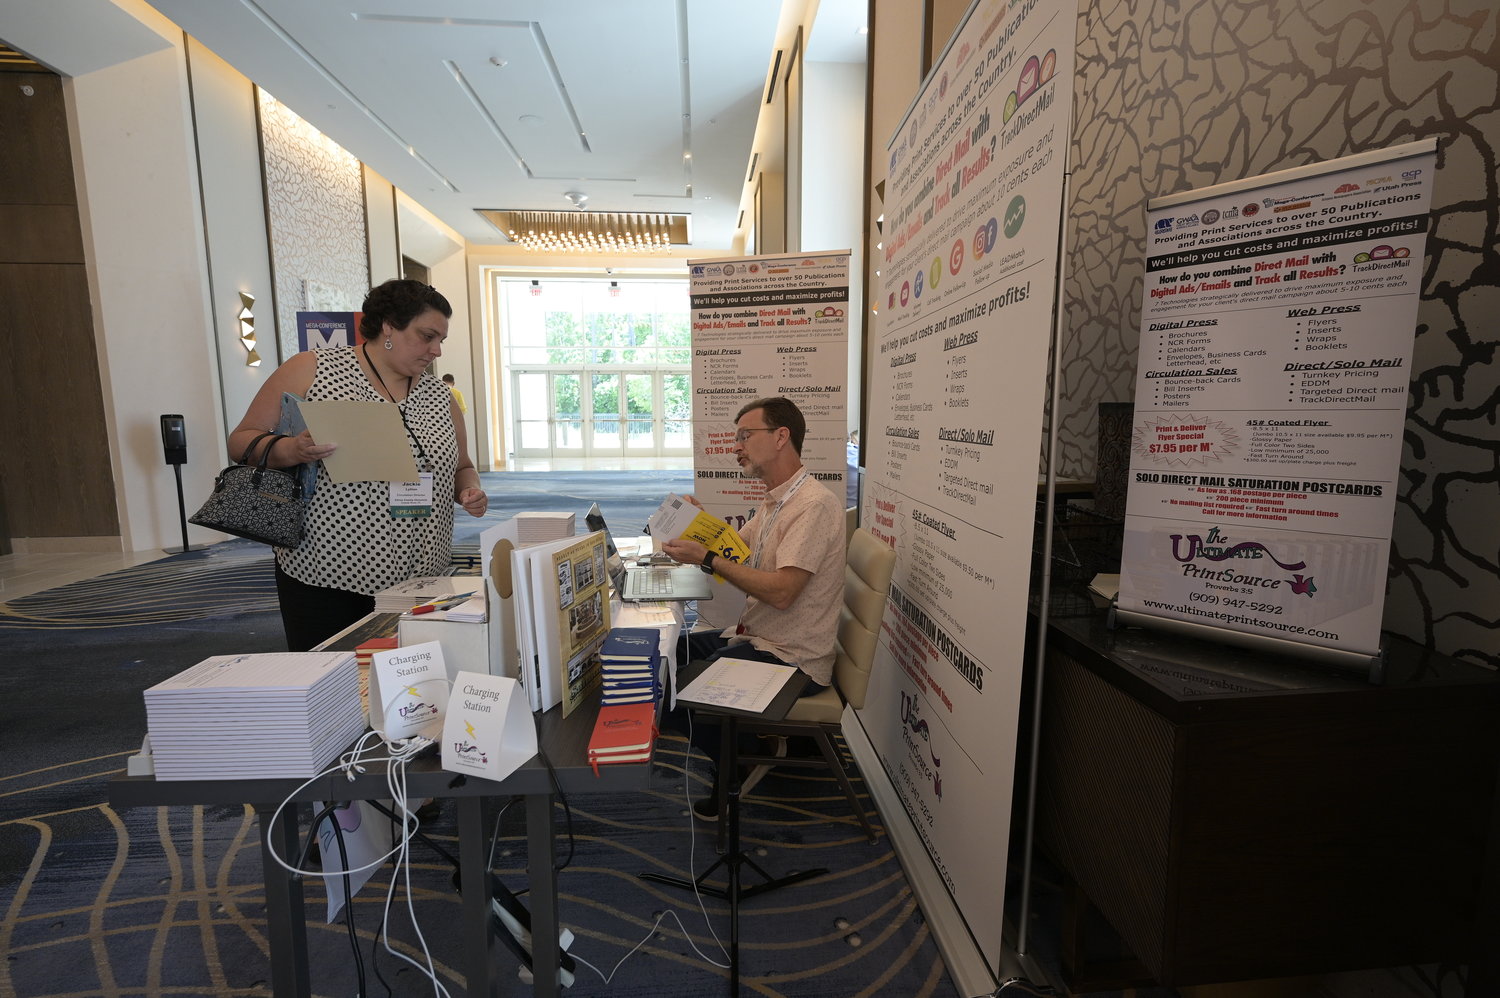 The Ultimate Print Source - a conference exhibitor (Photo by Phelan M. Ebenhack)